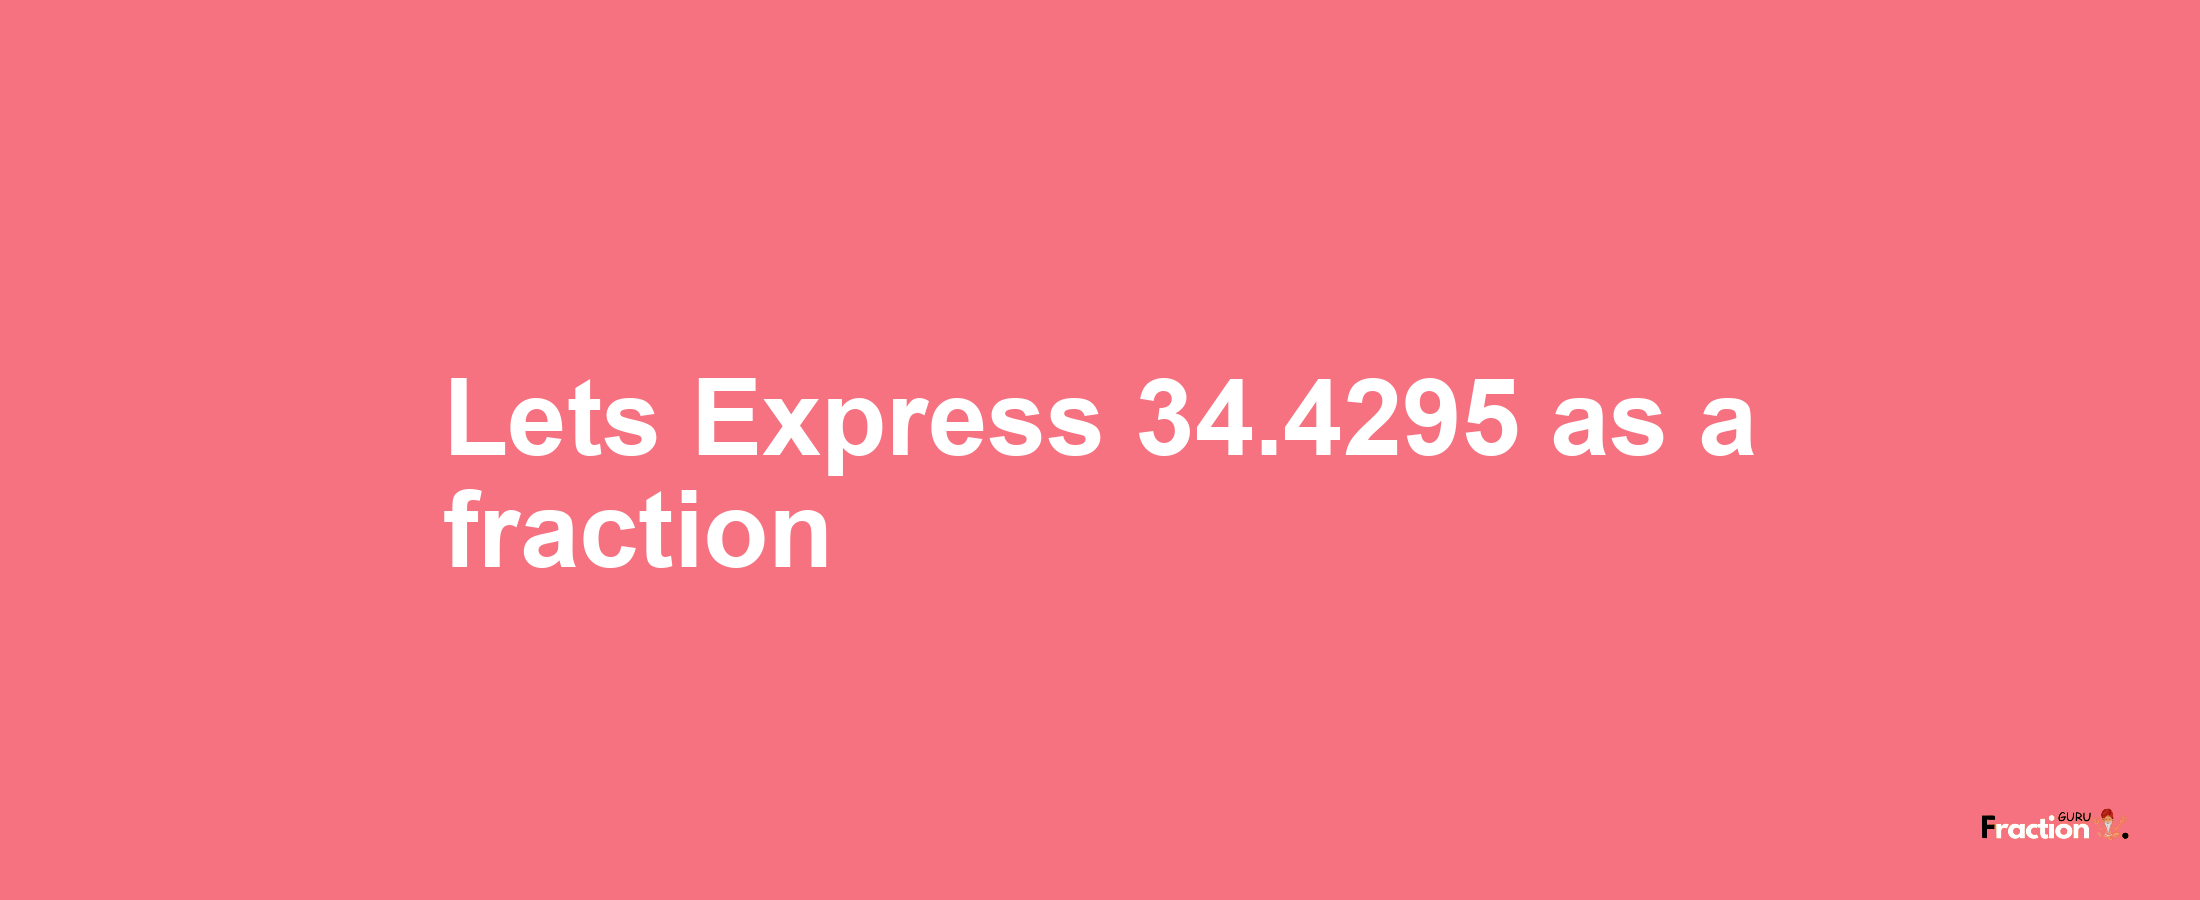 Lets Express 34.4295 as afraction